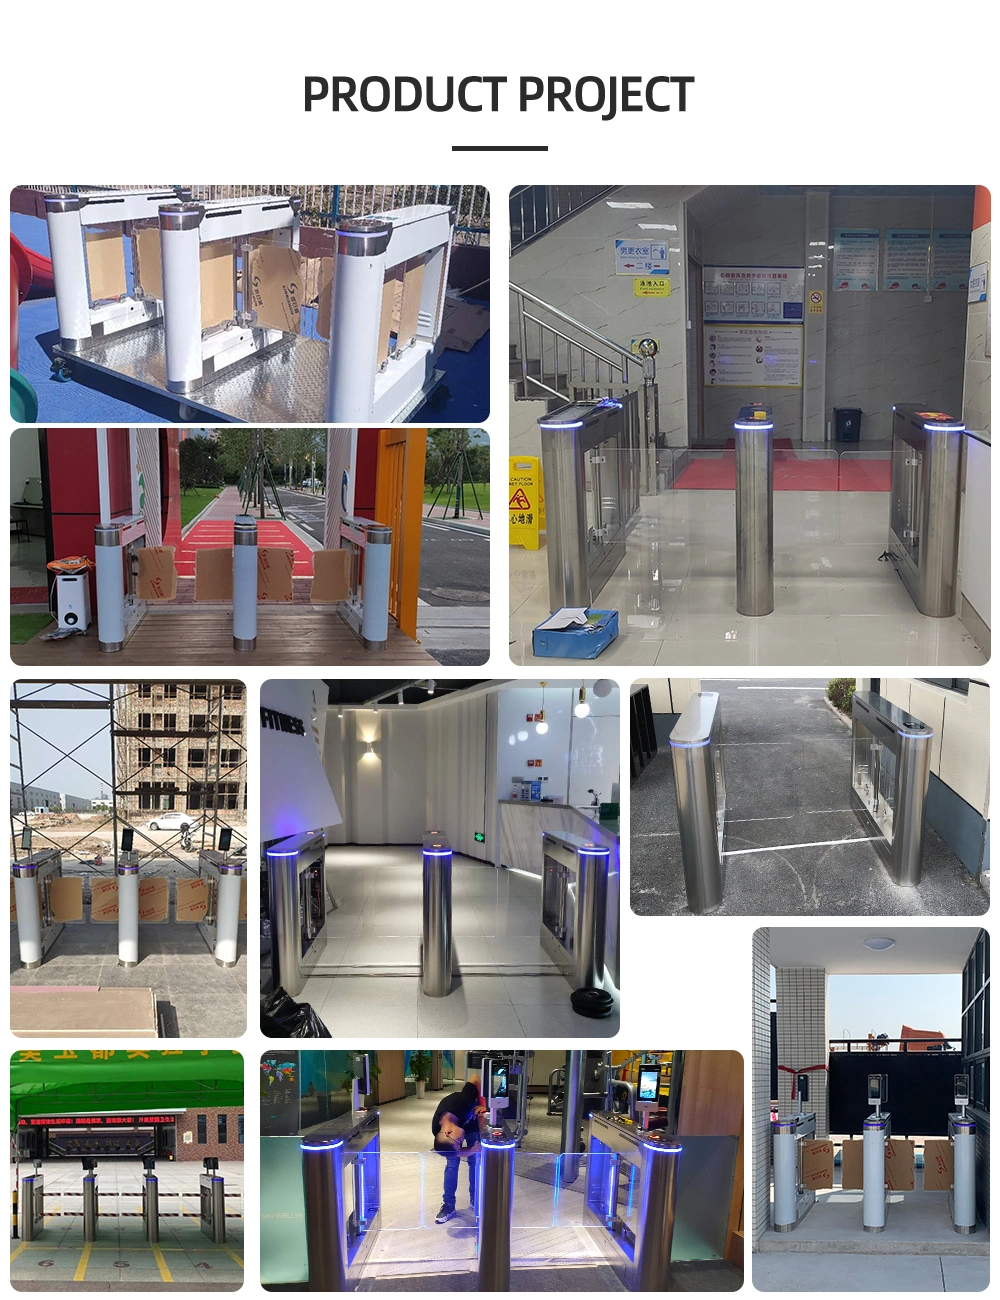 Electronic Bi-Directional Security Access Control Swing Barrier Turnstile Gate for Pedestrian Passing